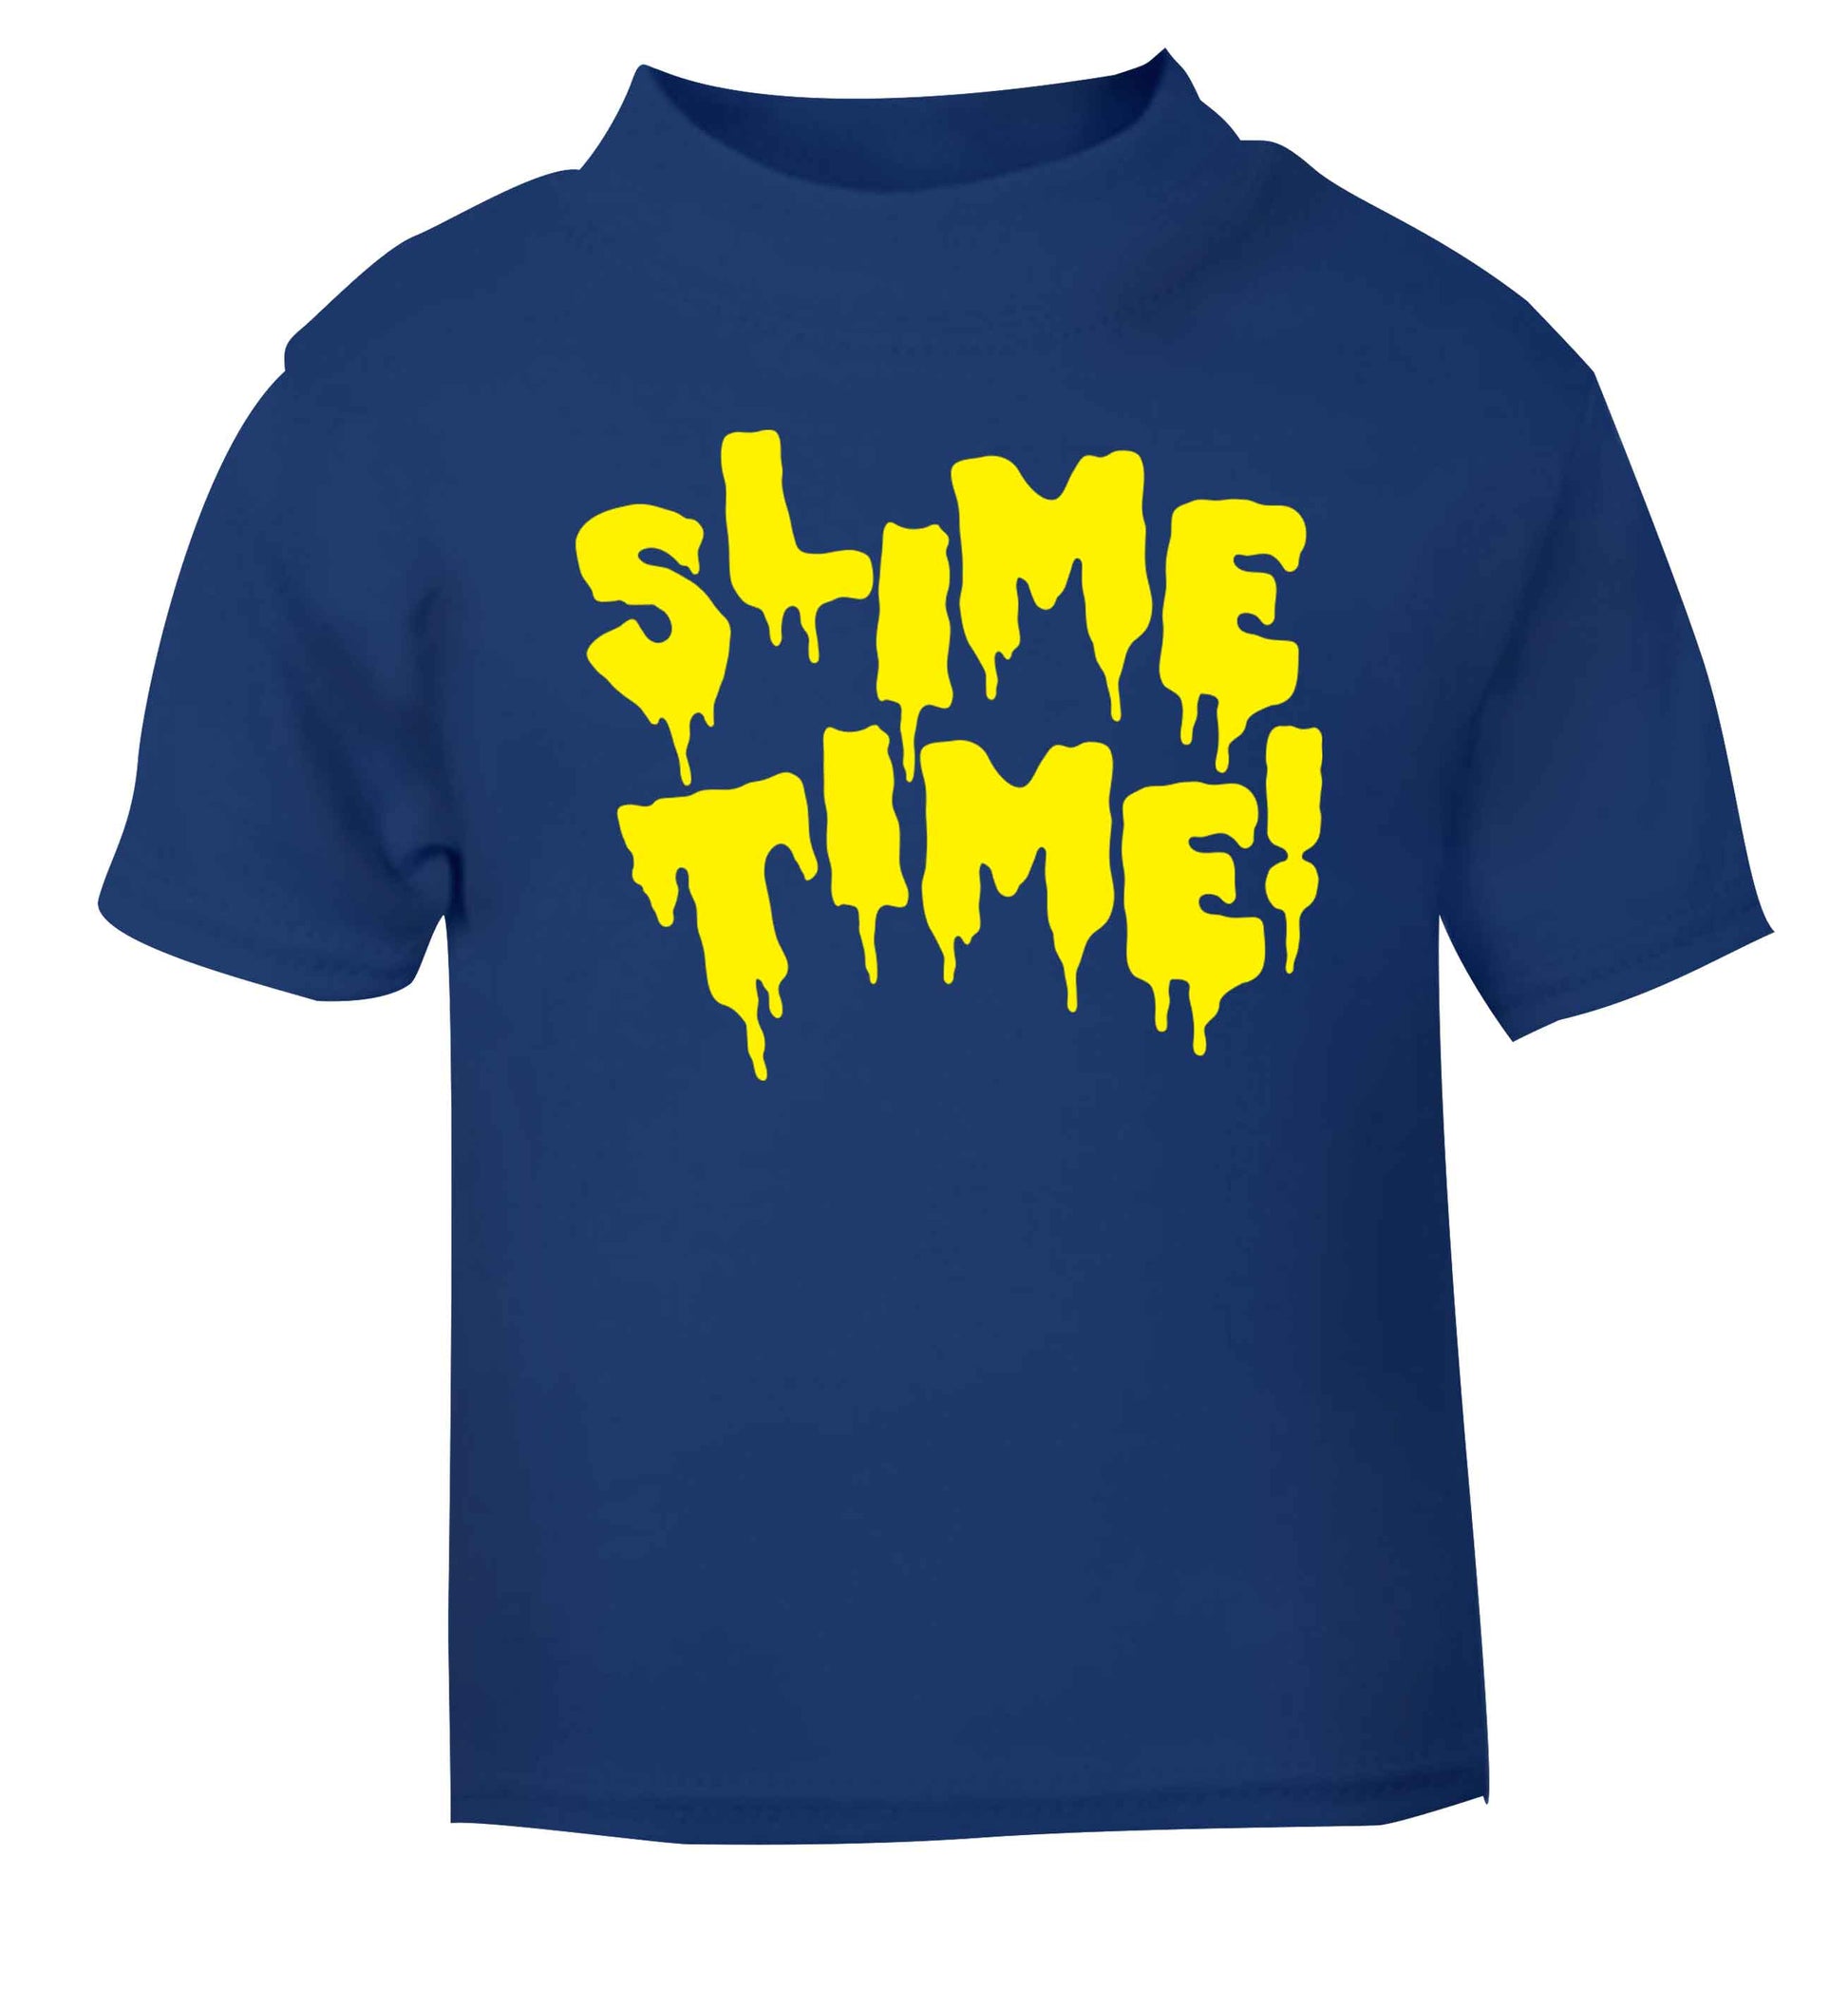 Neon yellow slime time blue baby toddler Tshirt 2 Years